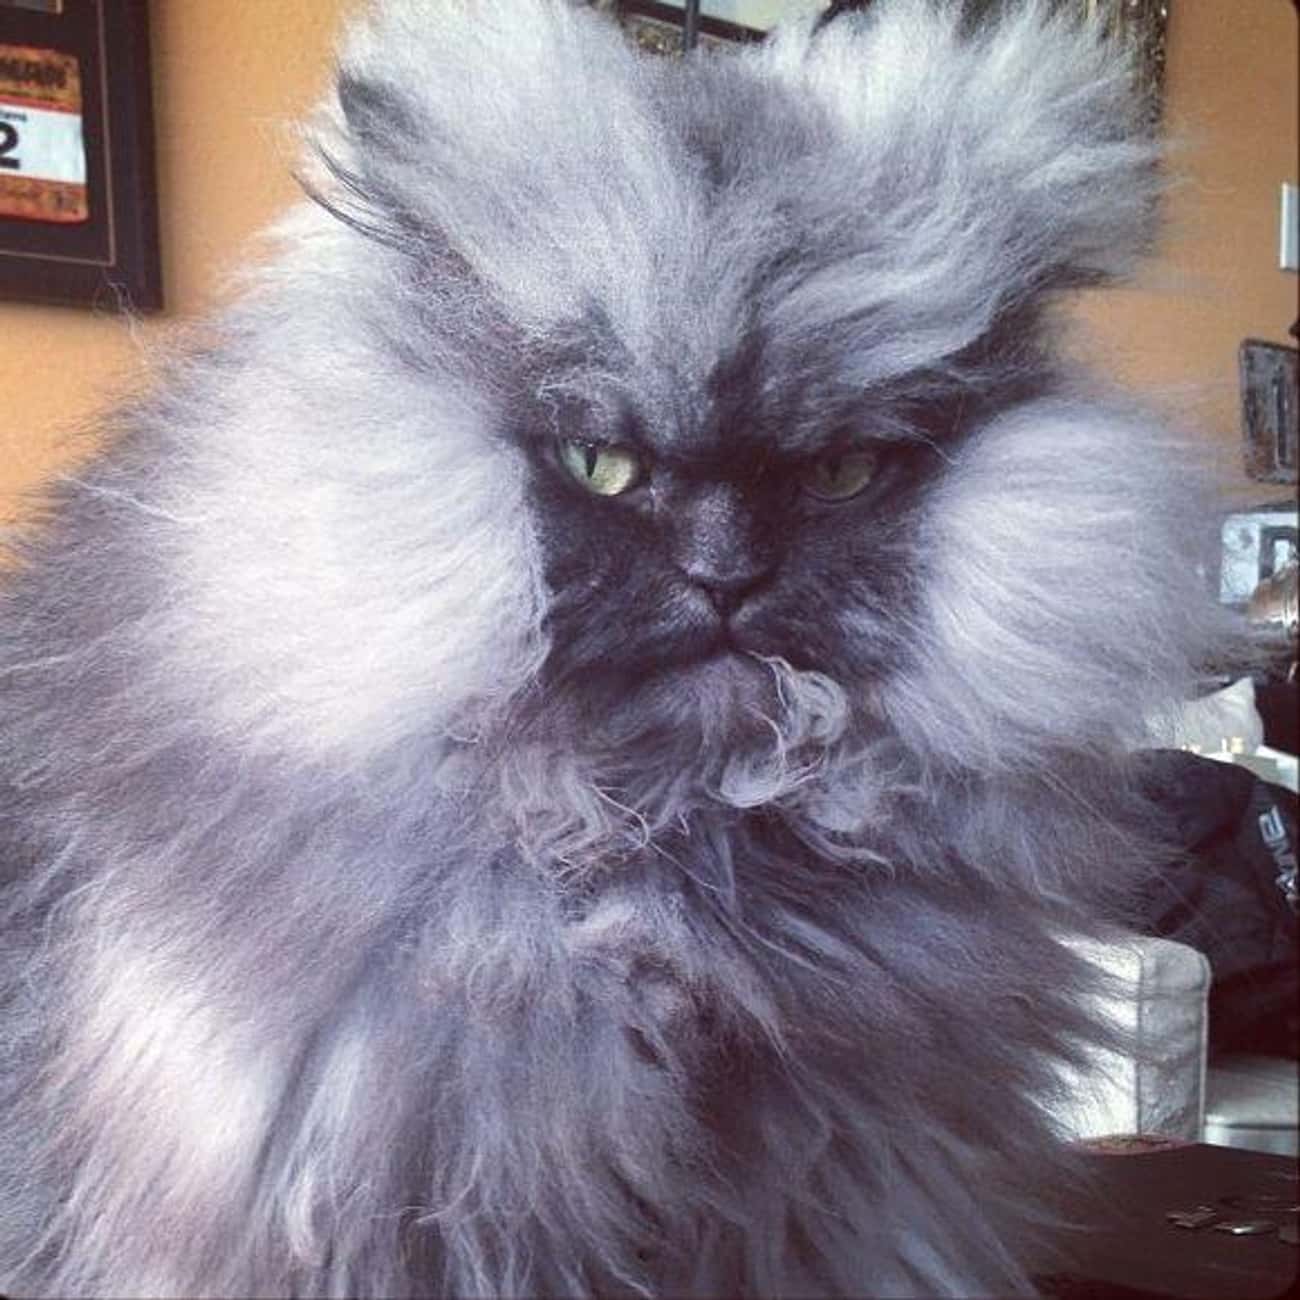 Unhappy Customer Cat Demands a Refund at the Blowout Bar